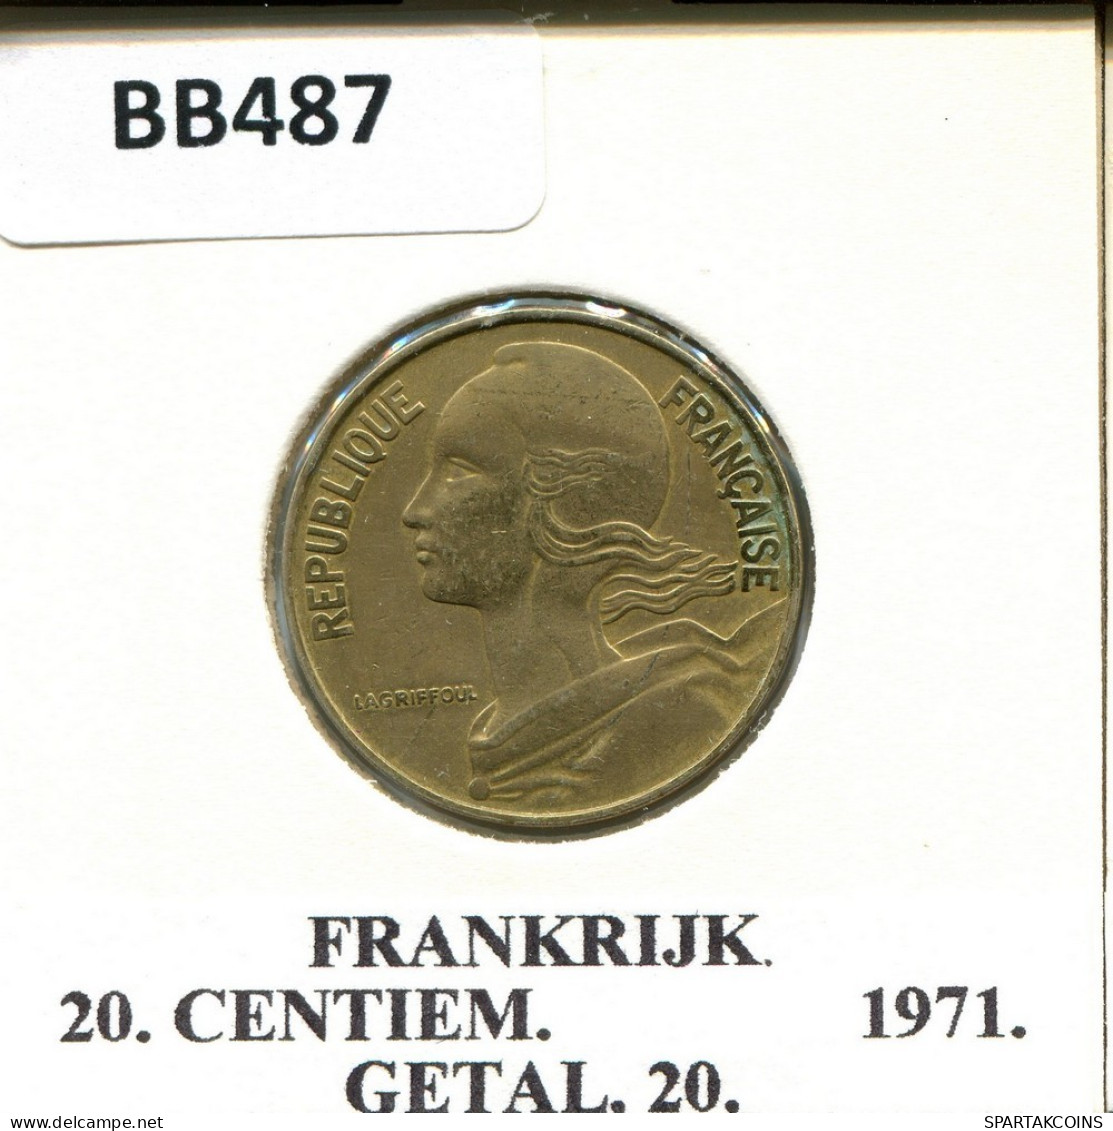 20 CENTIMES 1971 FRANCE Coin #BB487.U.A - 20 Centimes